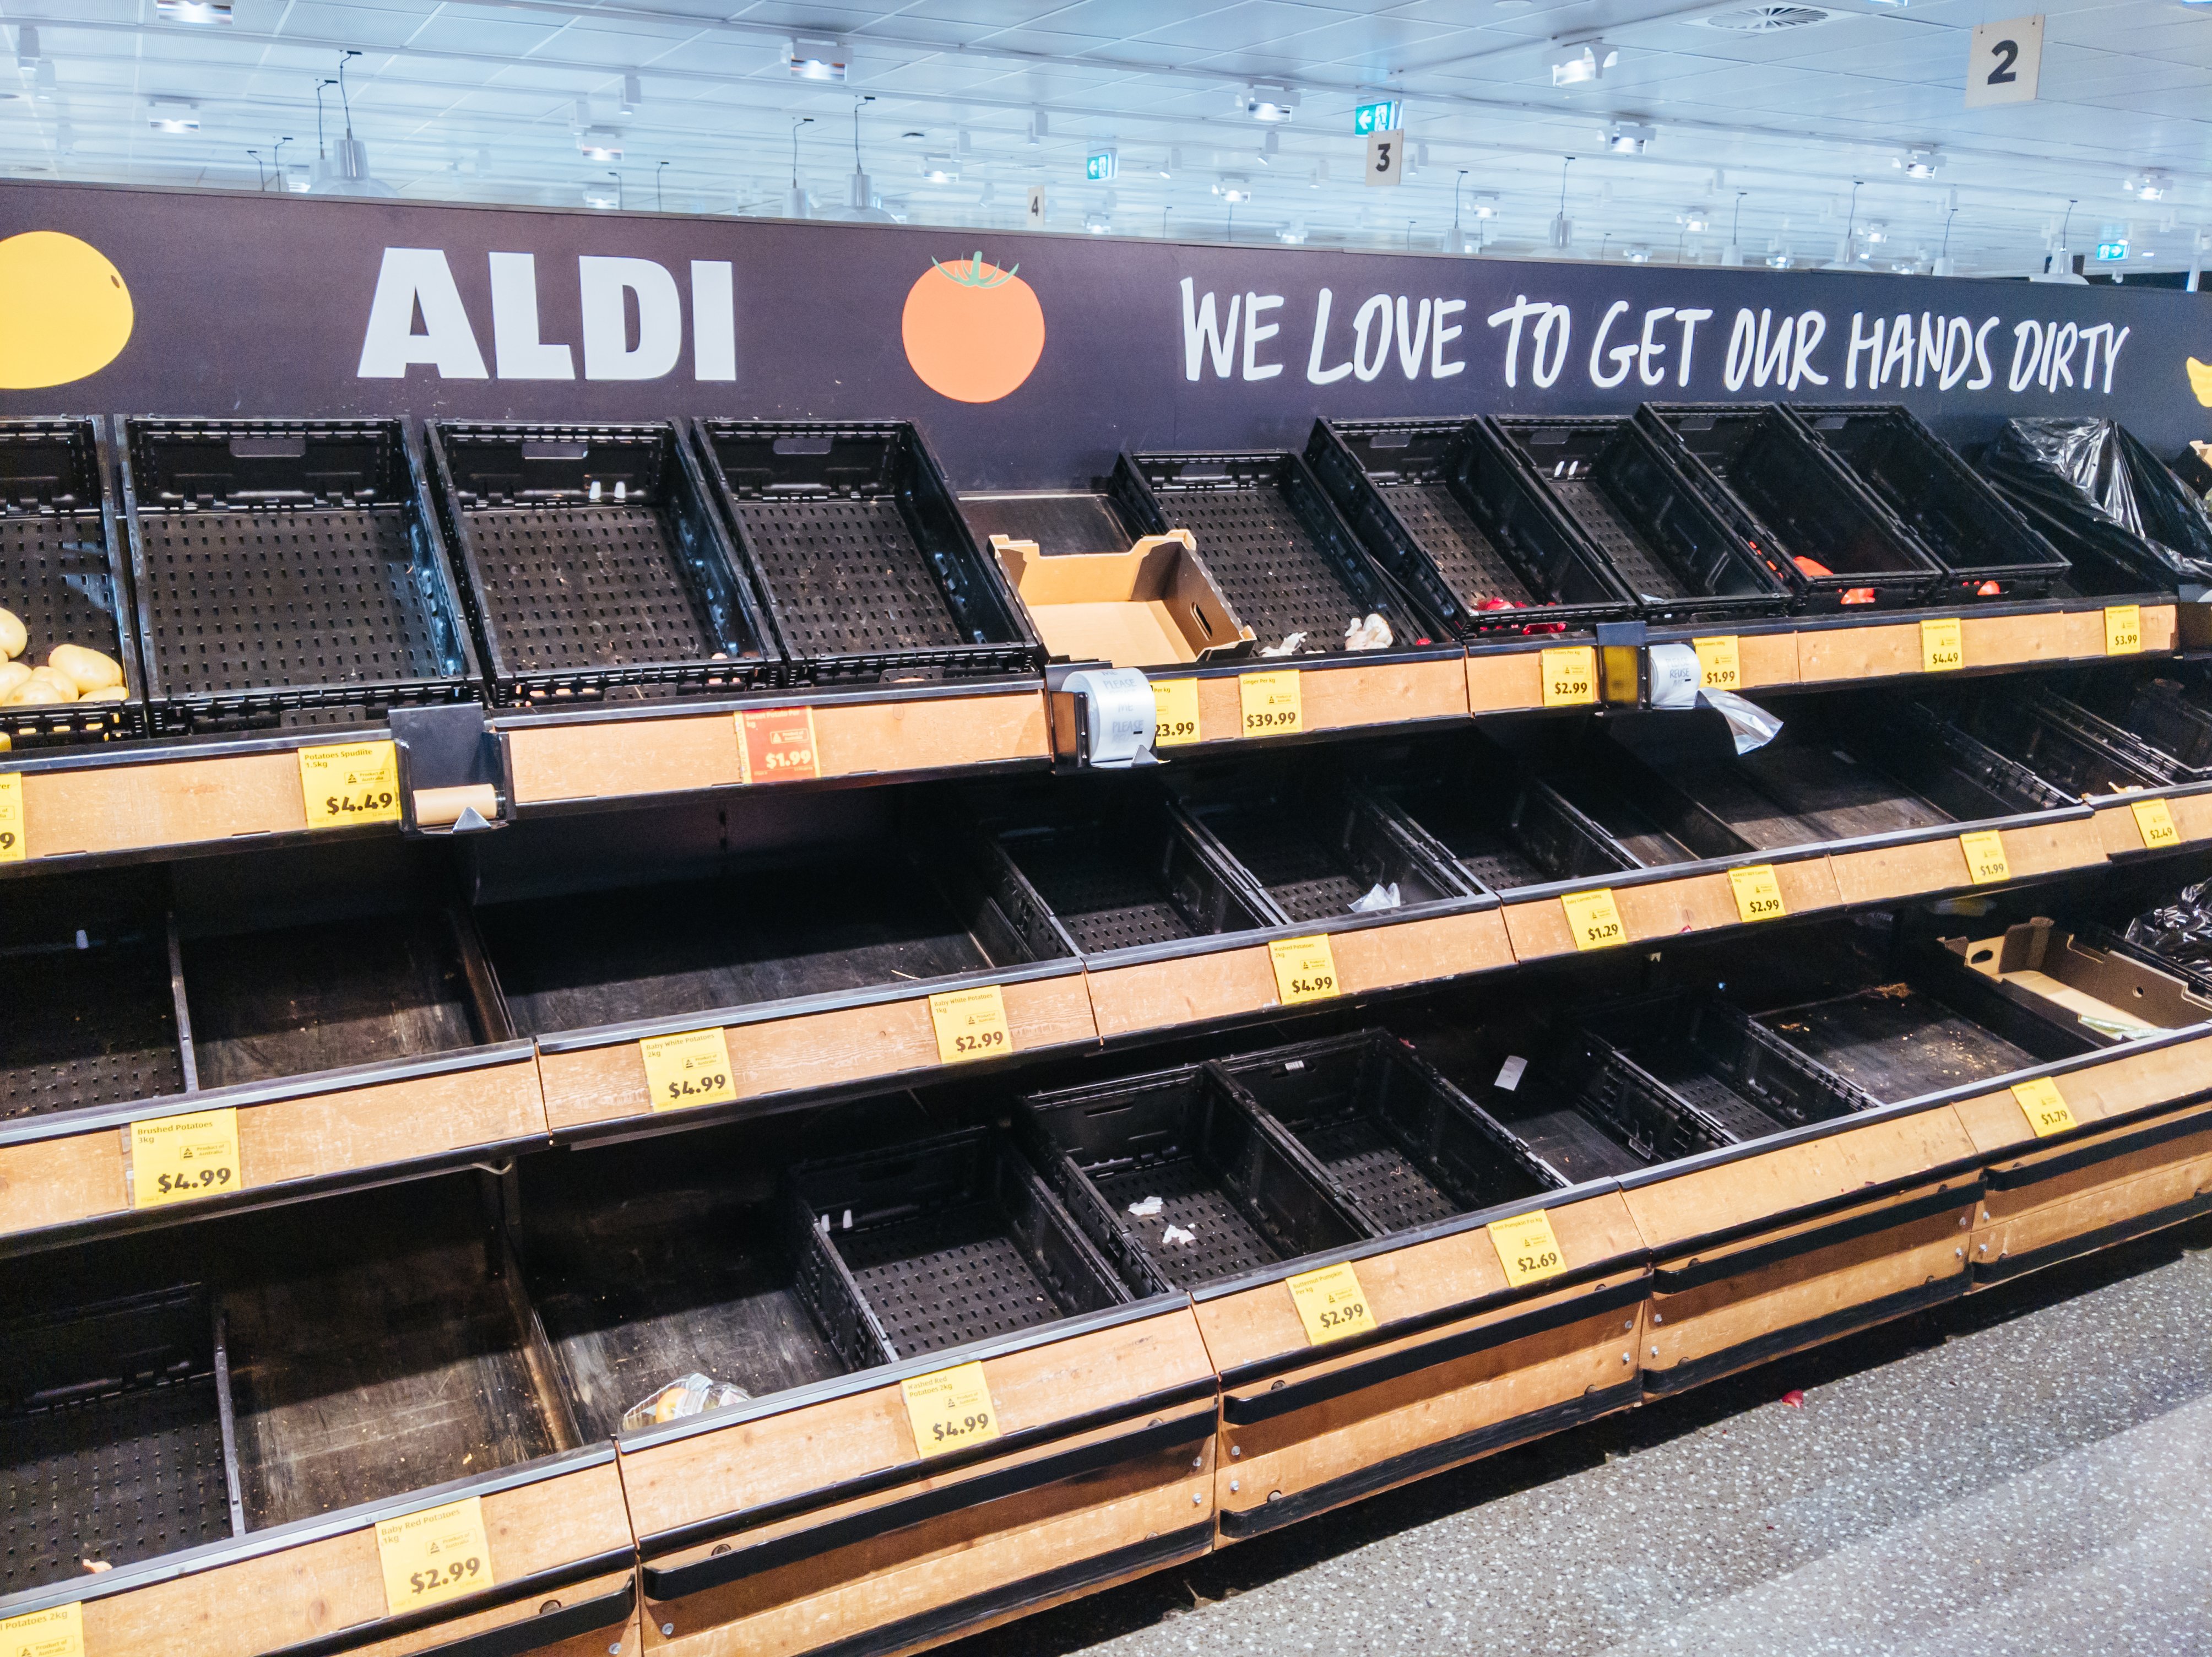 Empty shelves became a view across many Aldi Supermarkets throughout the pandemic. | Photo: Getty Images.